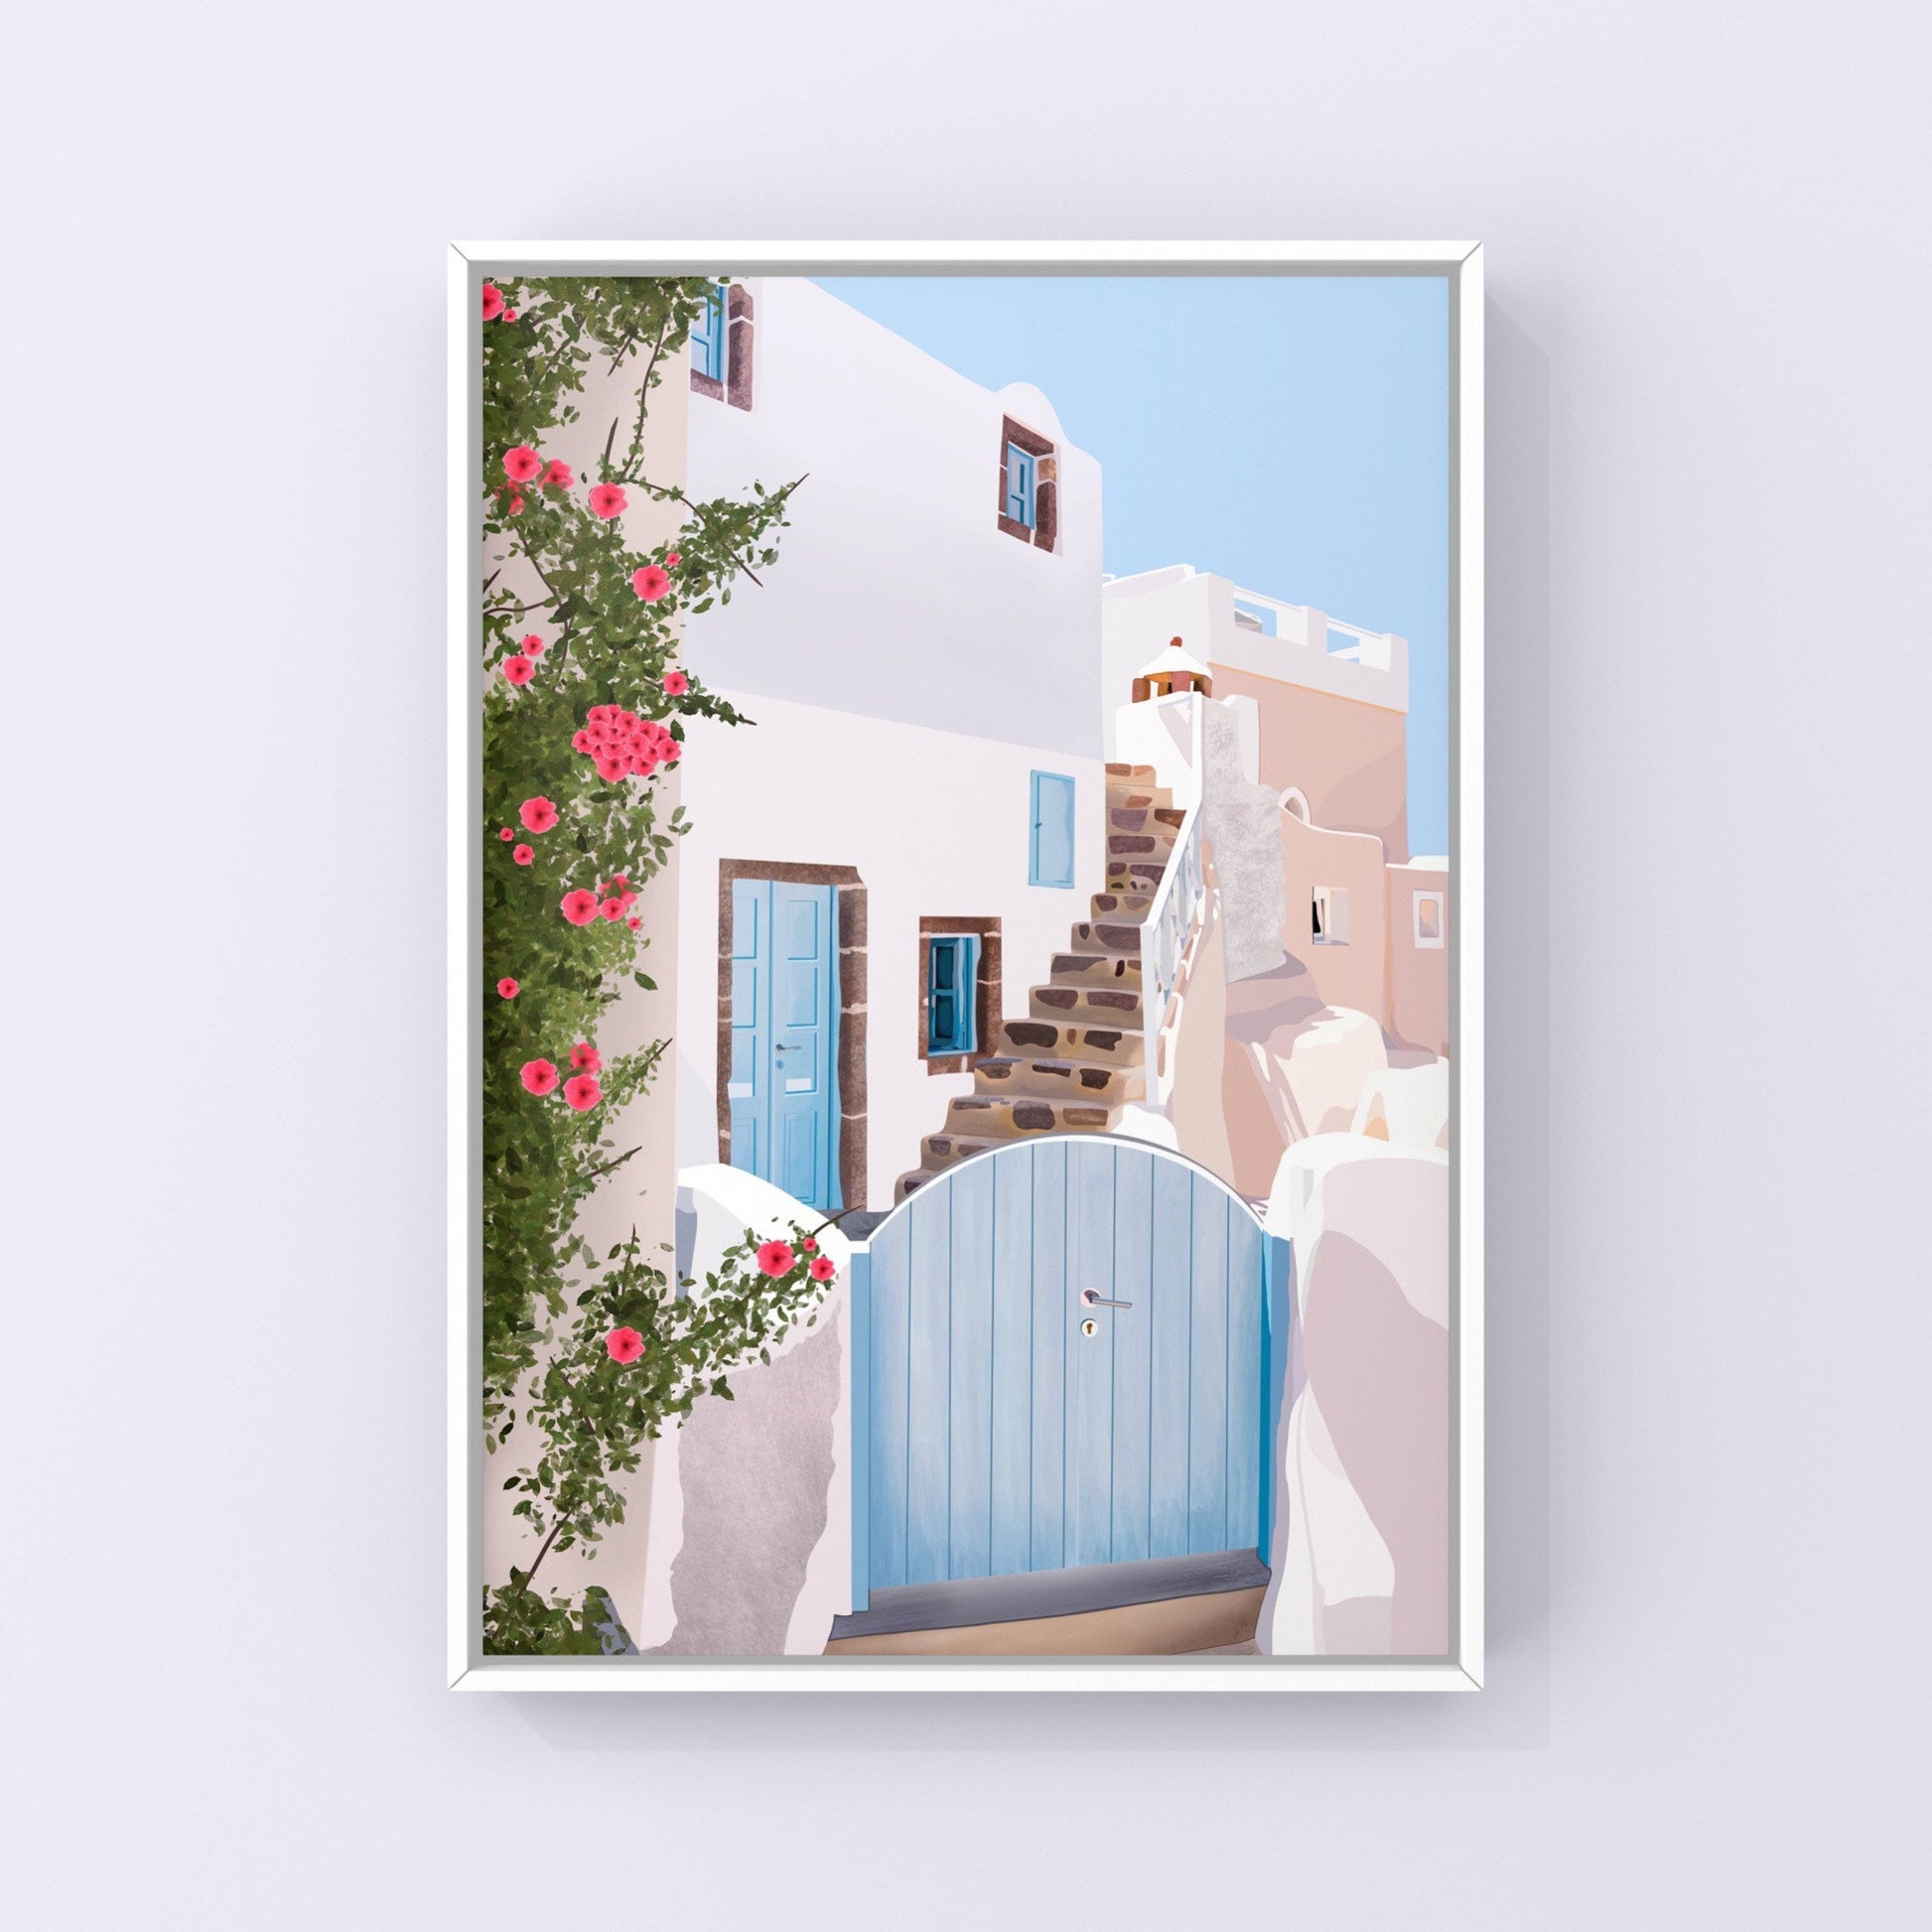 Greece cityscape art print - You can almost feel the warm breeze and the sun on your face when you see the beautiful and calming shades of white, blue, and neutrals/ beige with vibrant green leaves/vines and bright pink/fascia flowers.